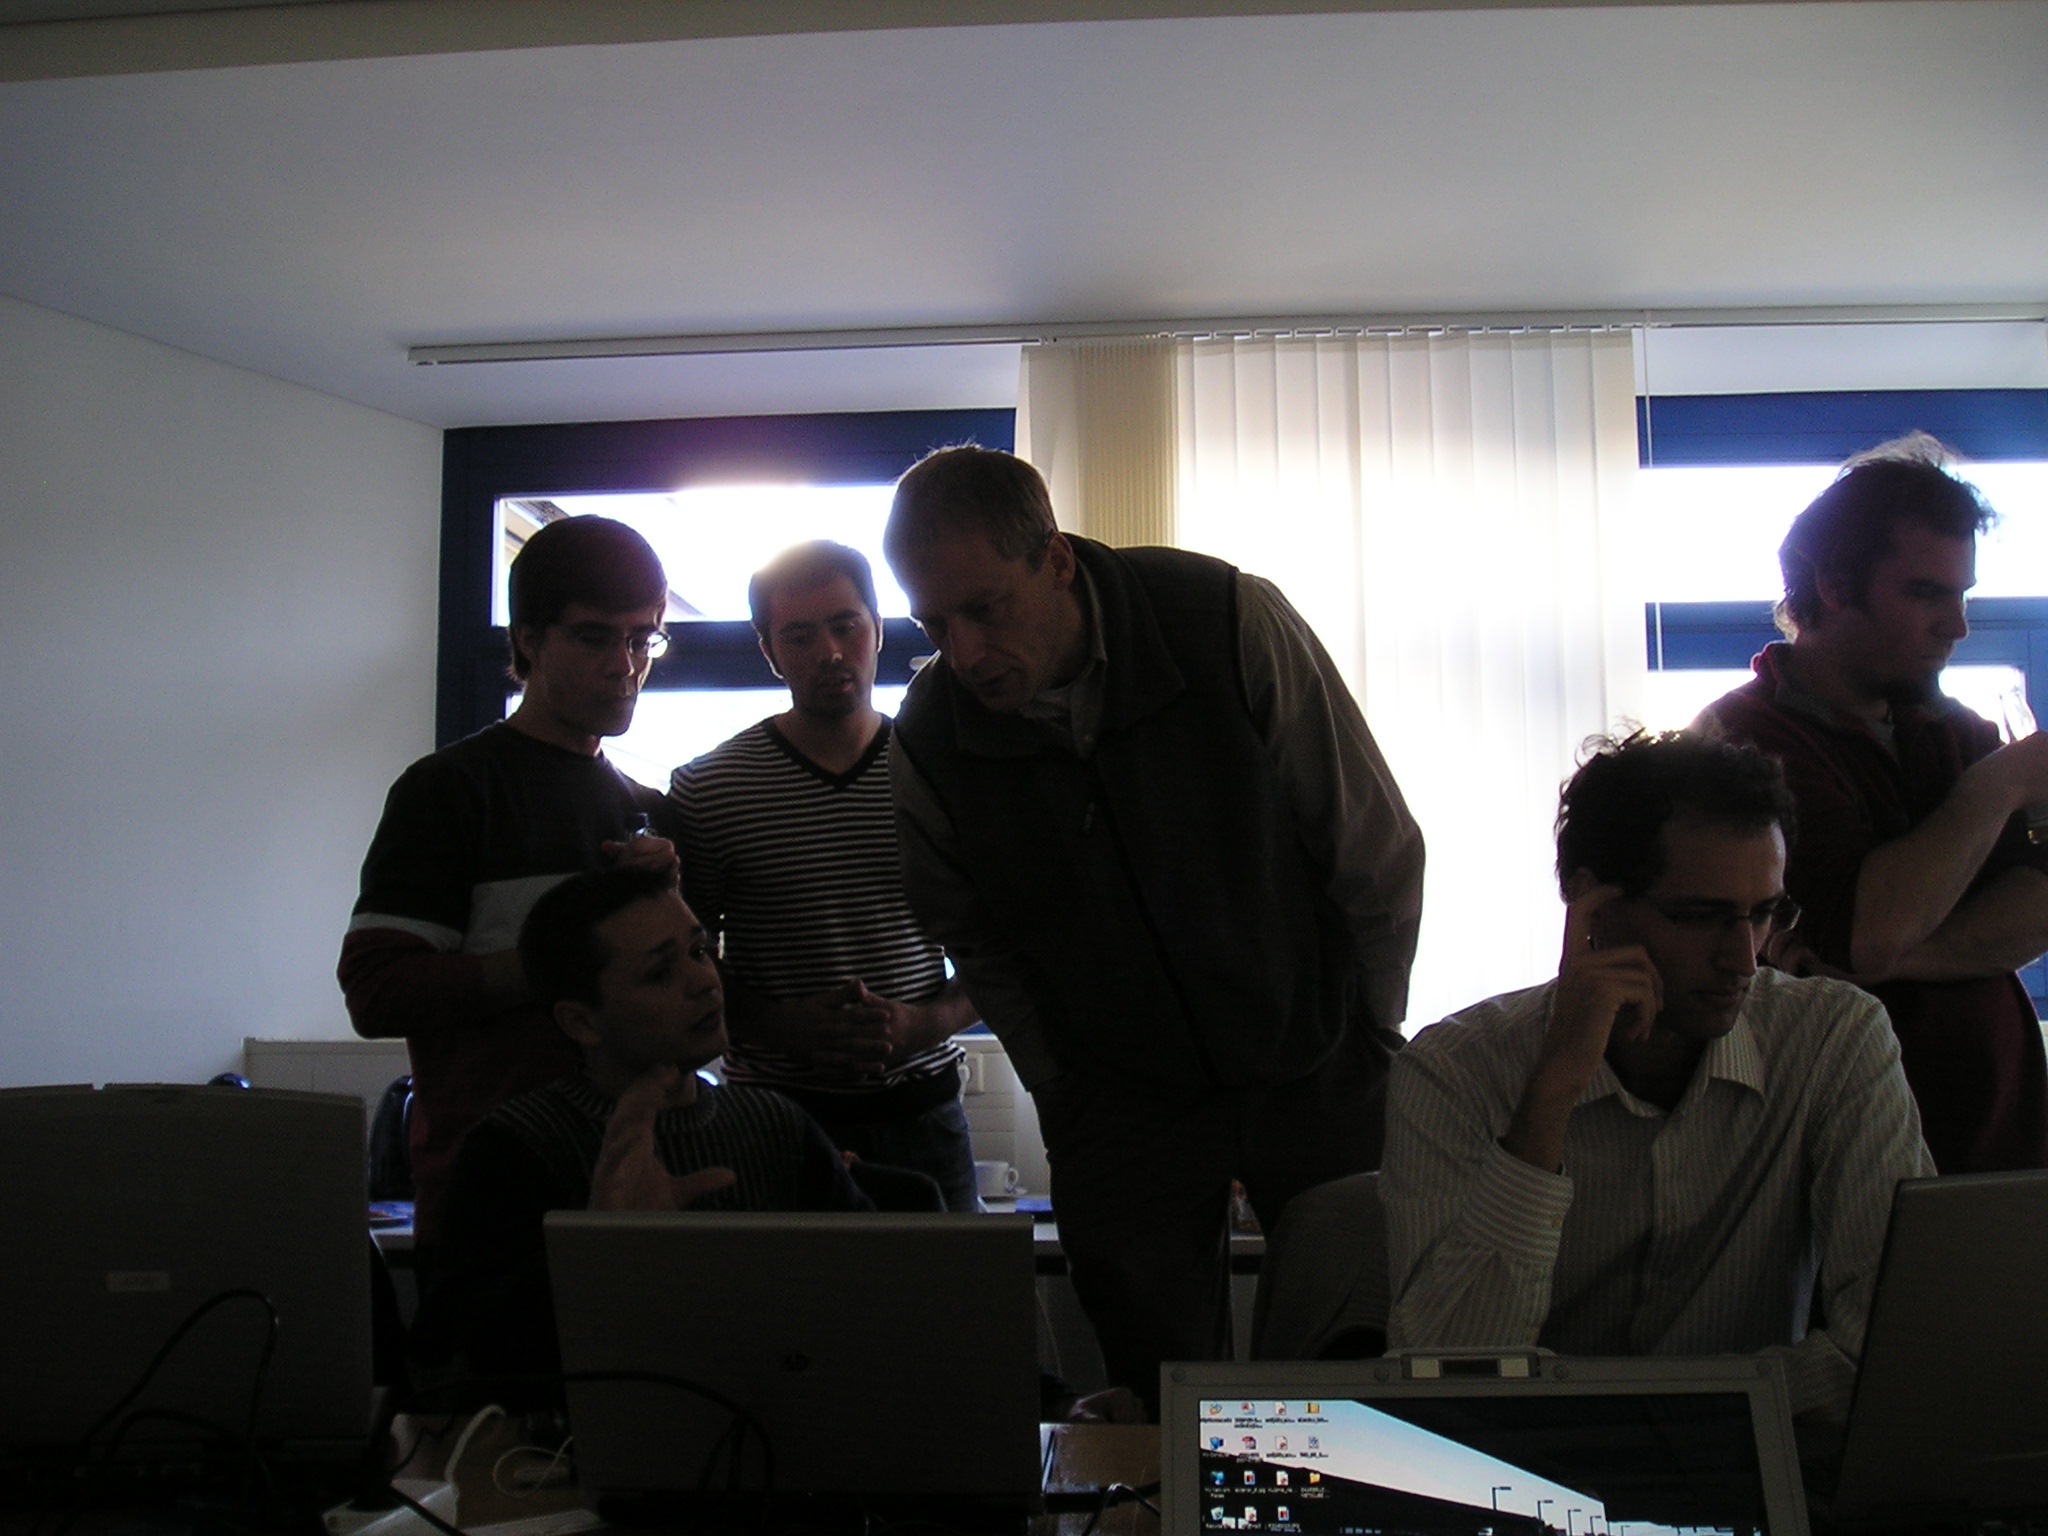 group of men in front of laptops sitting in the same room